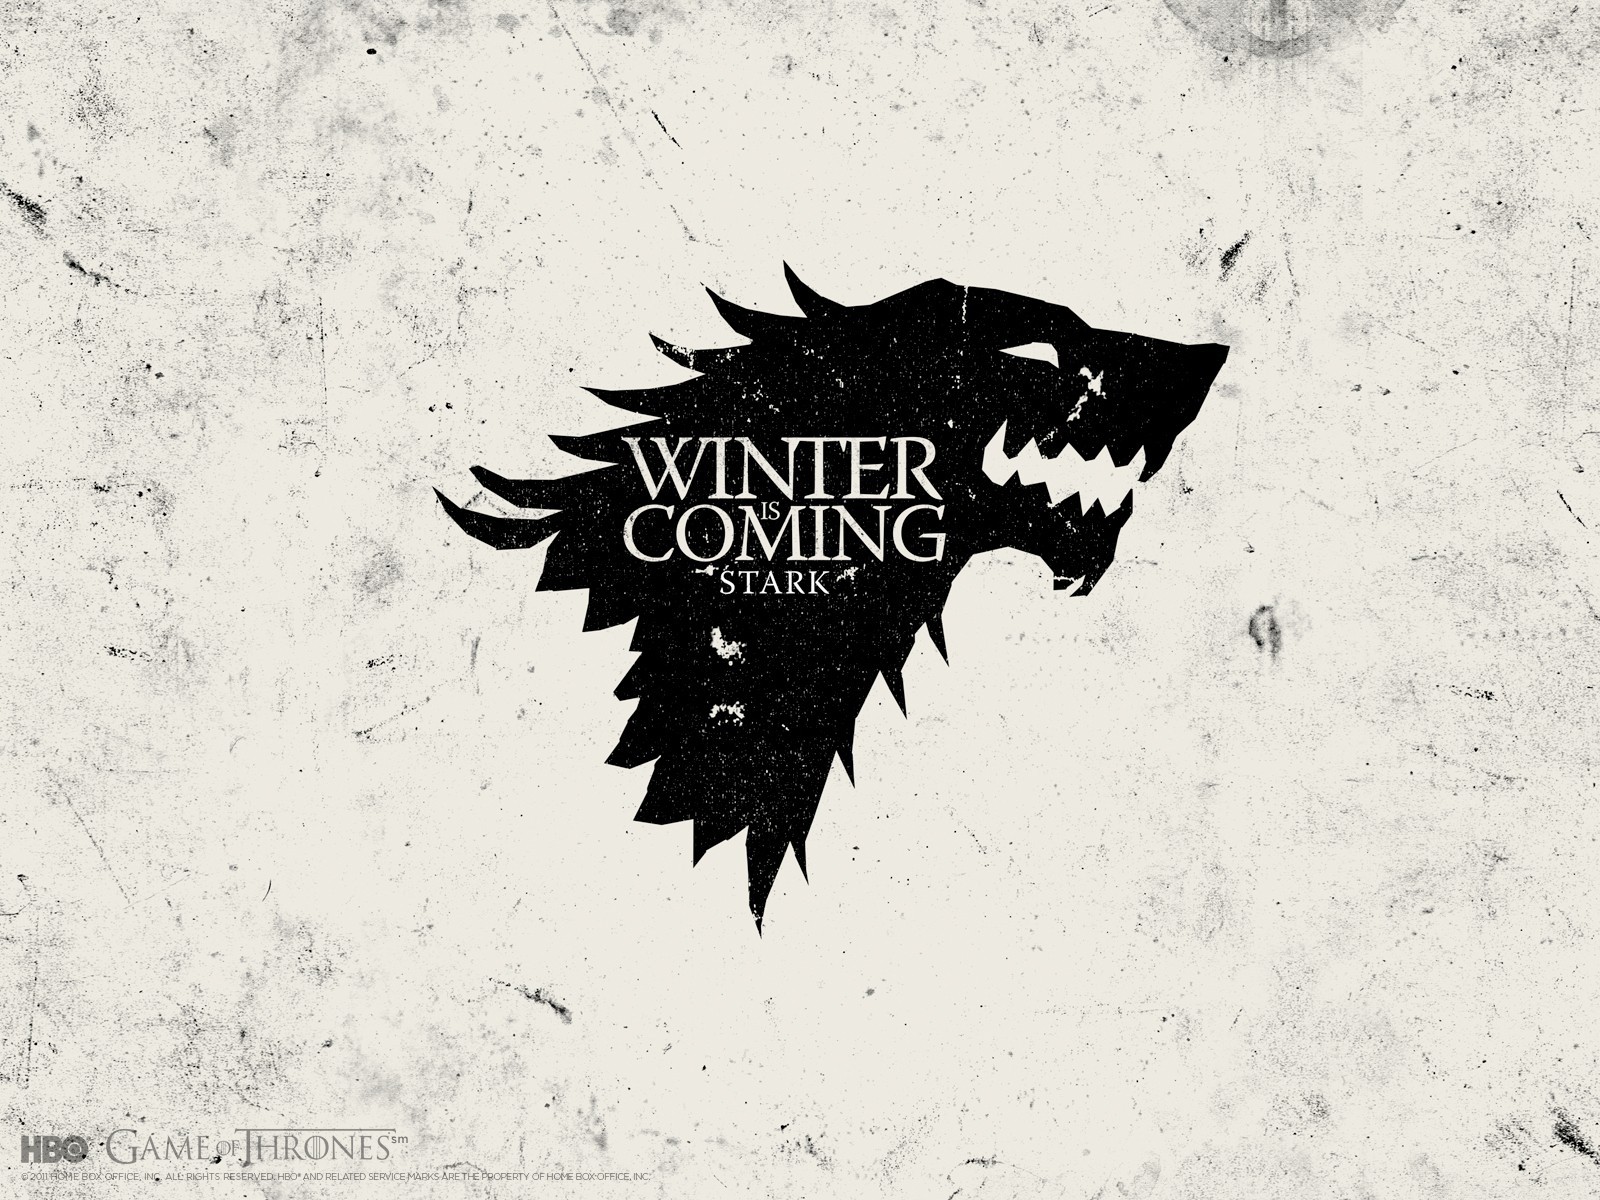 General 1600x1200 Game of Thrones A Song of Ice and Fire House Stark Winter Is Coming sigils TV series